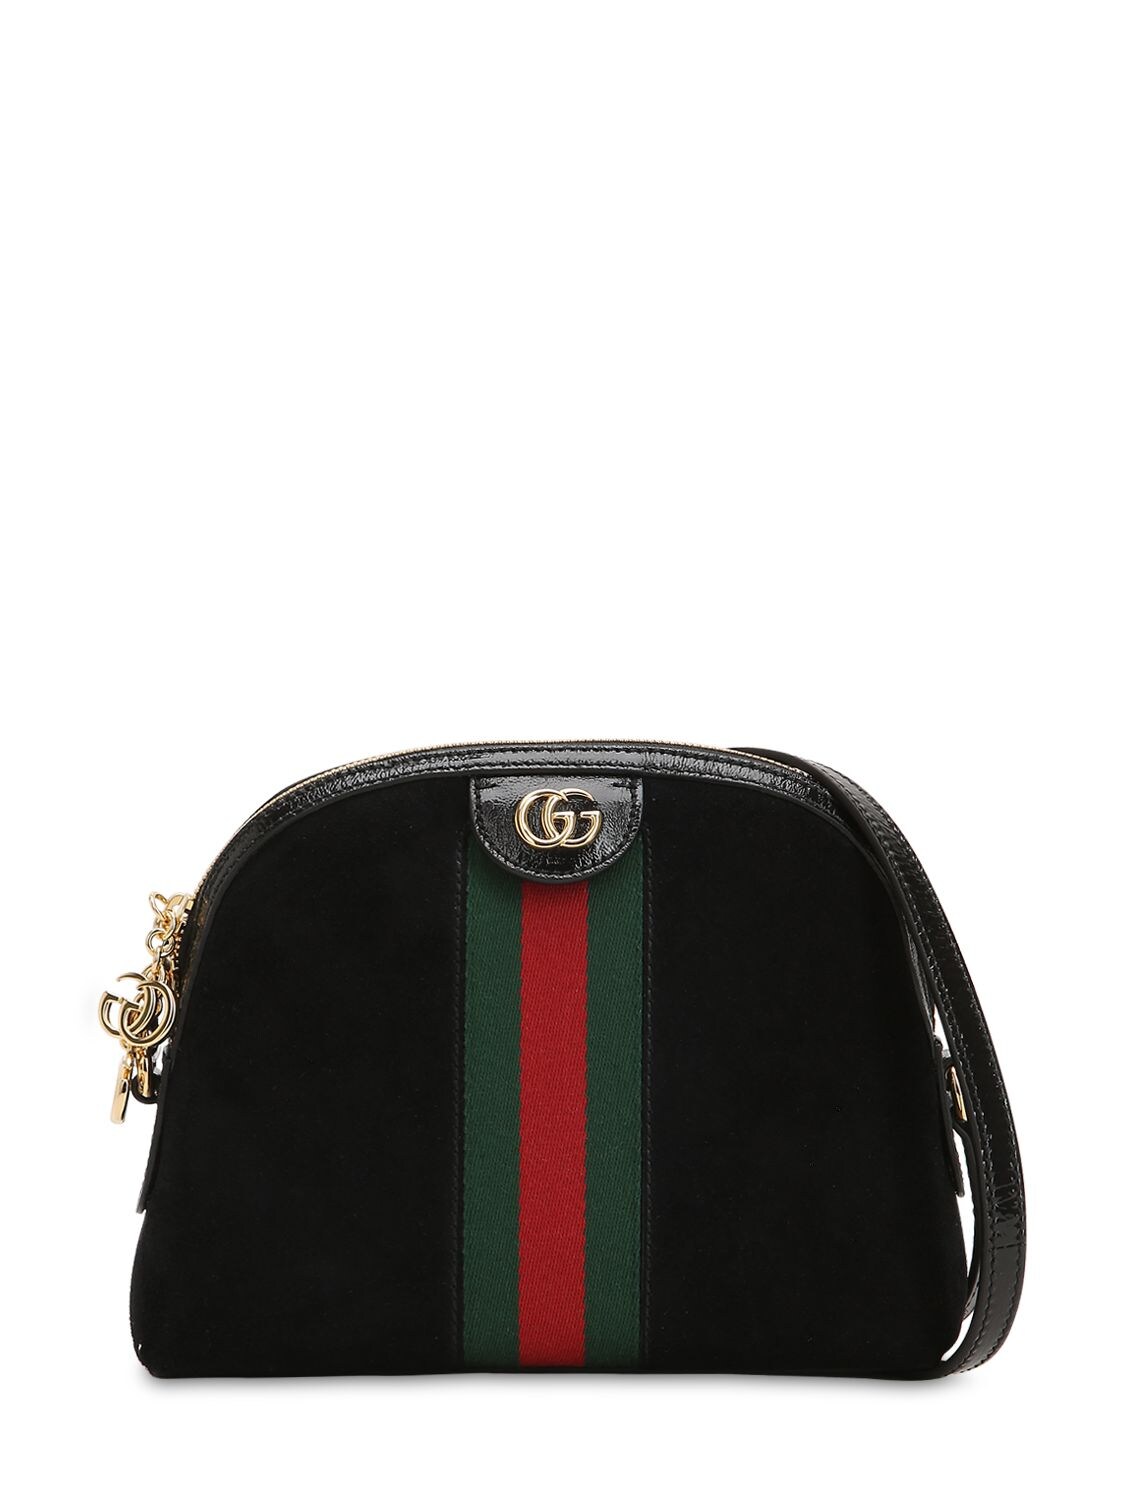 Gucci Small Ophidia Suede Shoulder Bag In Black